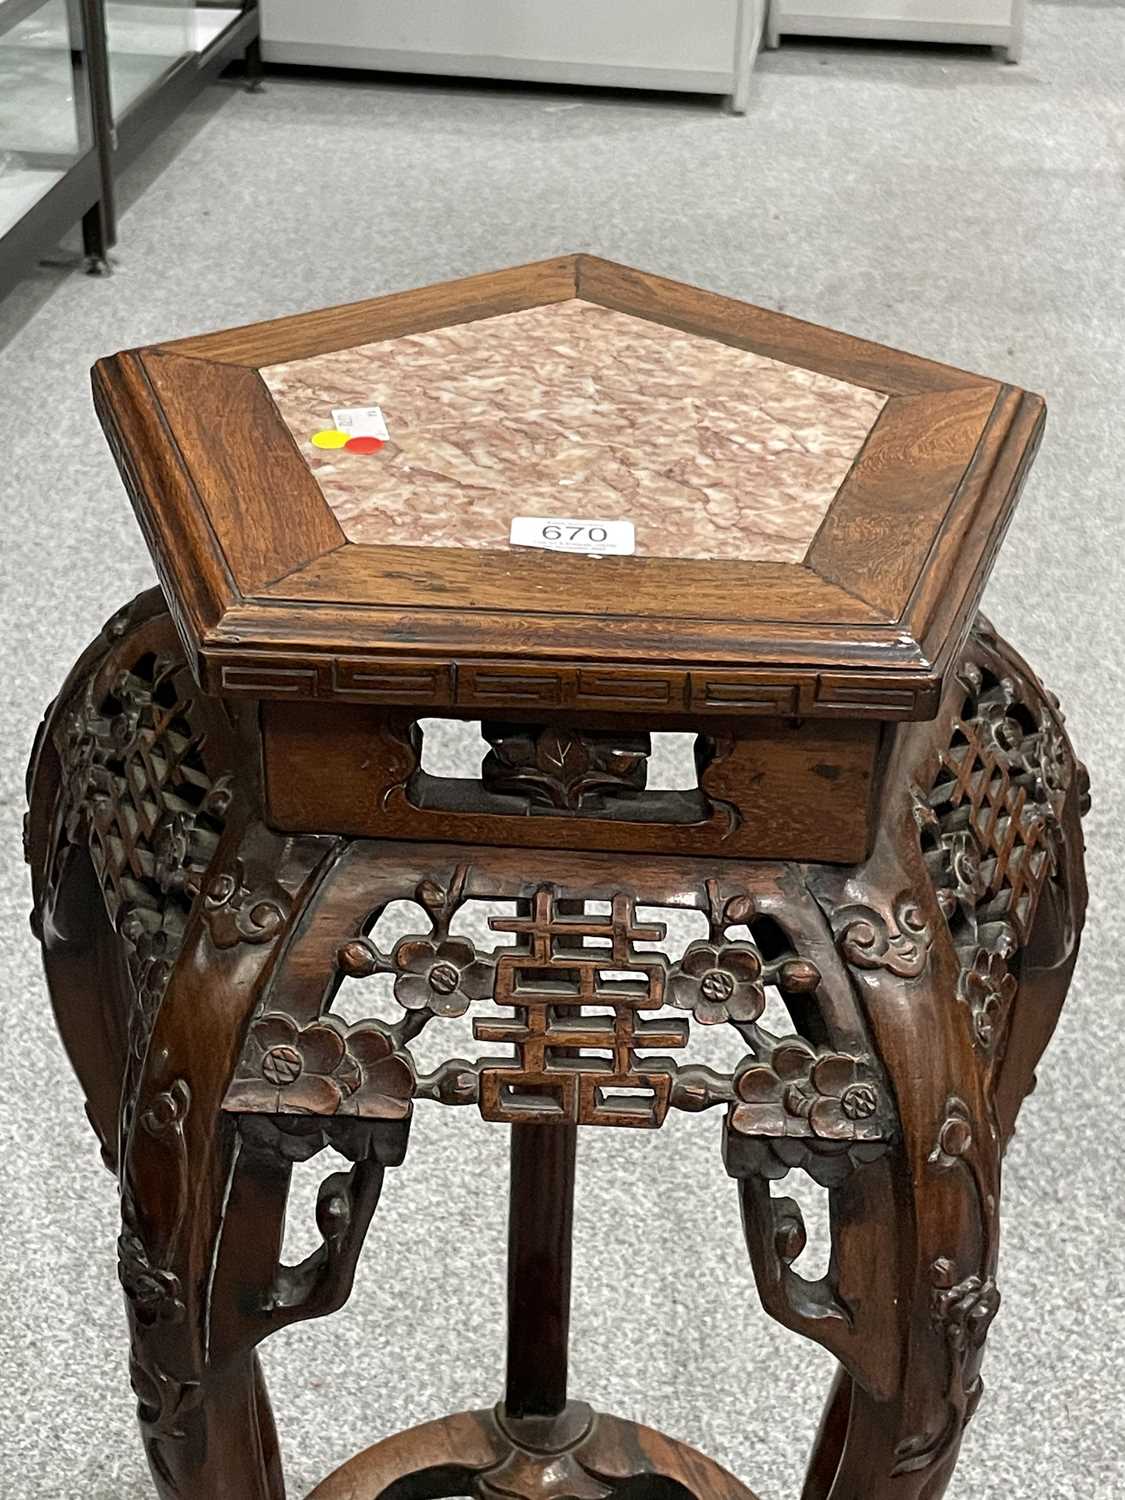 A CHINESE MARBLE-INSET ROSEWOOD PLANTSTAND, LATE 19TH CENTURY - Image 2 of 6